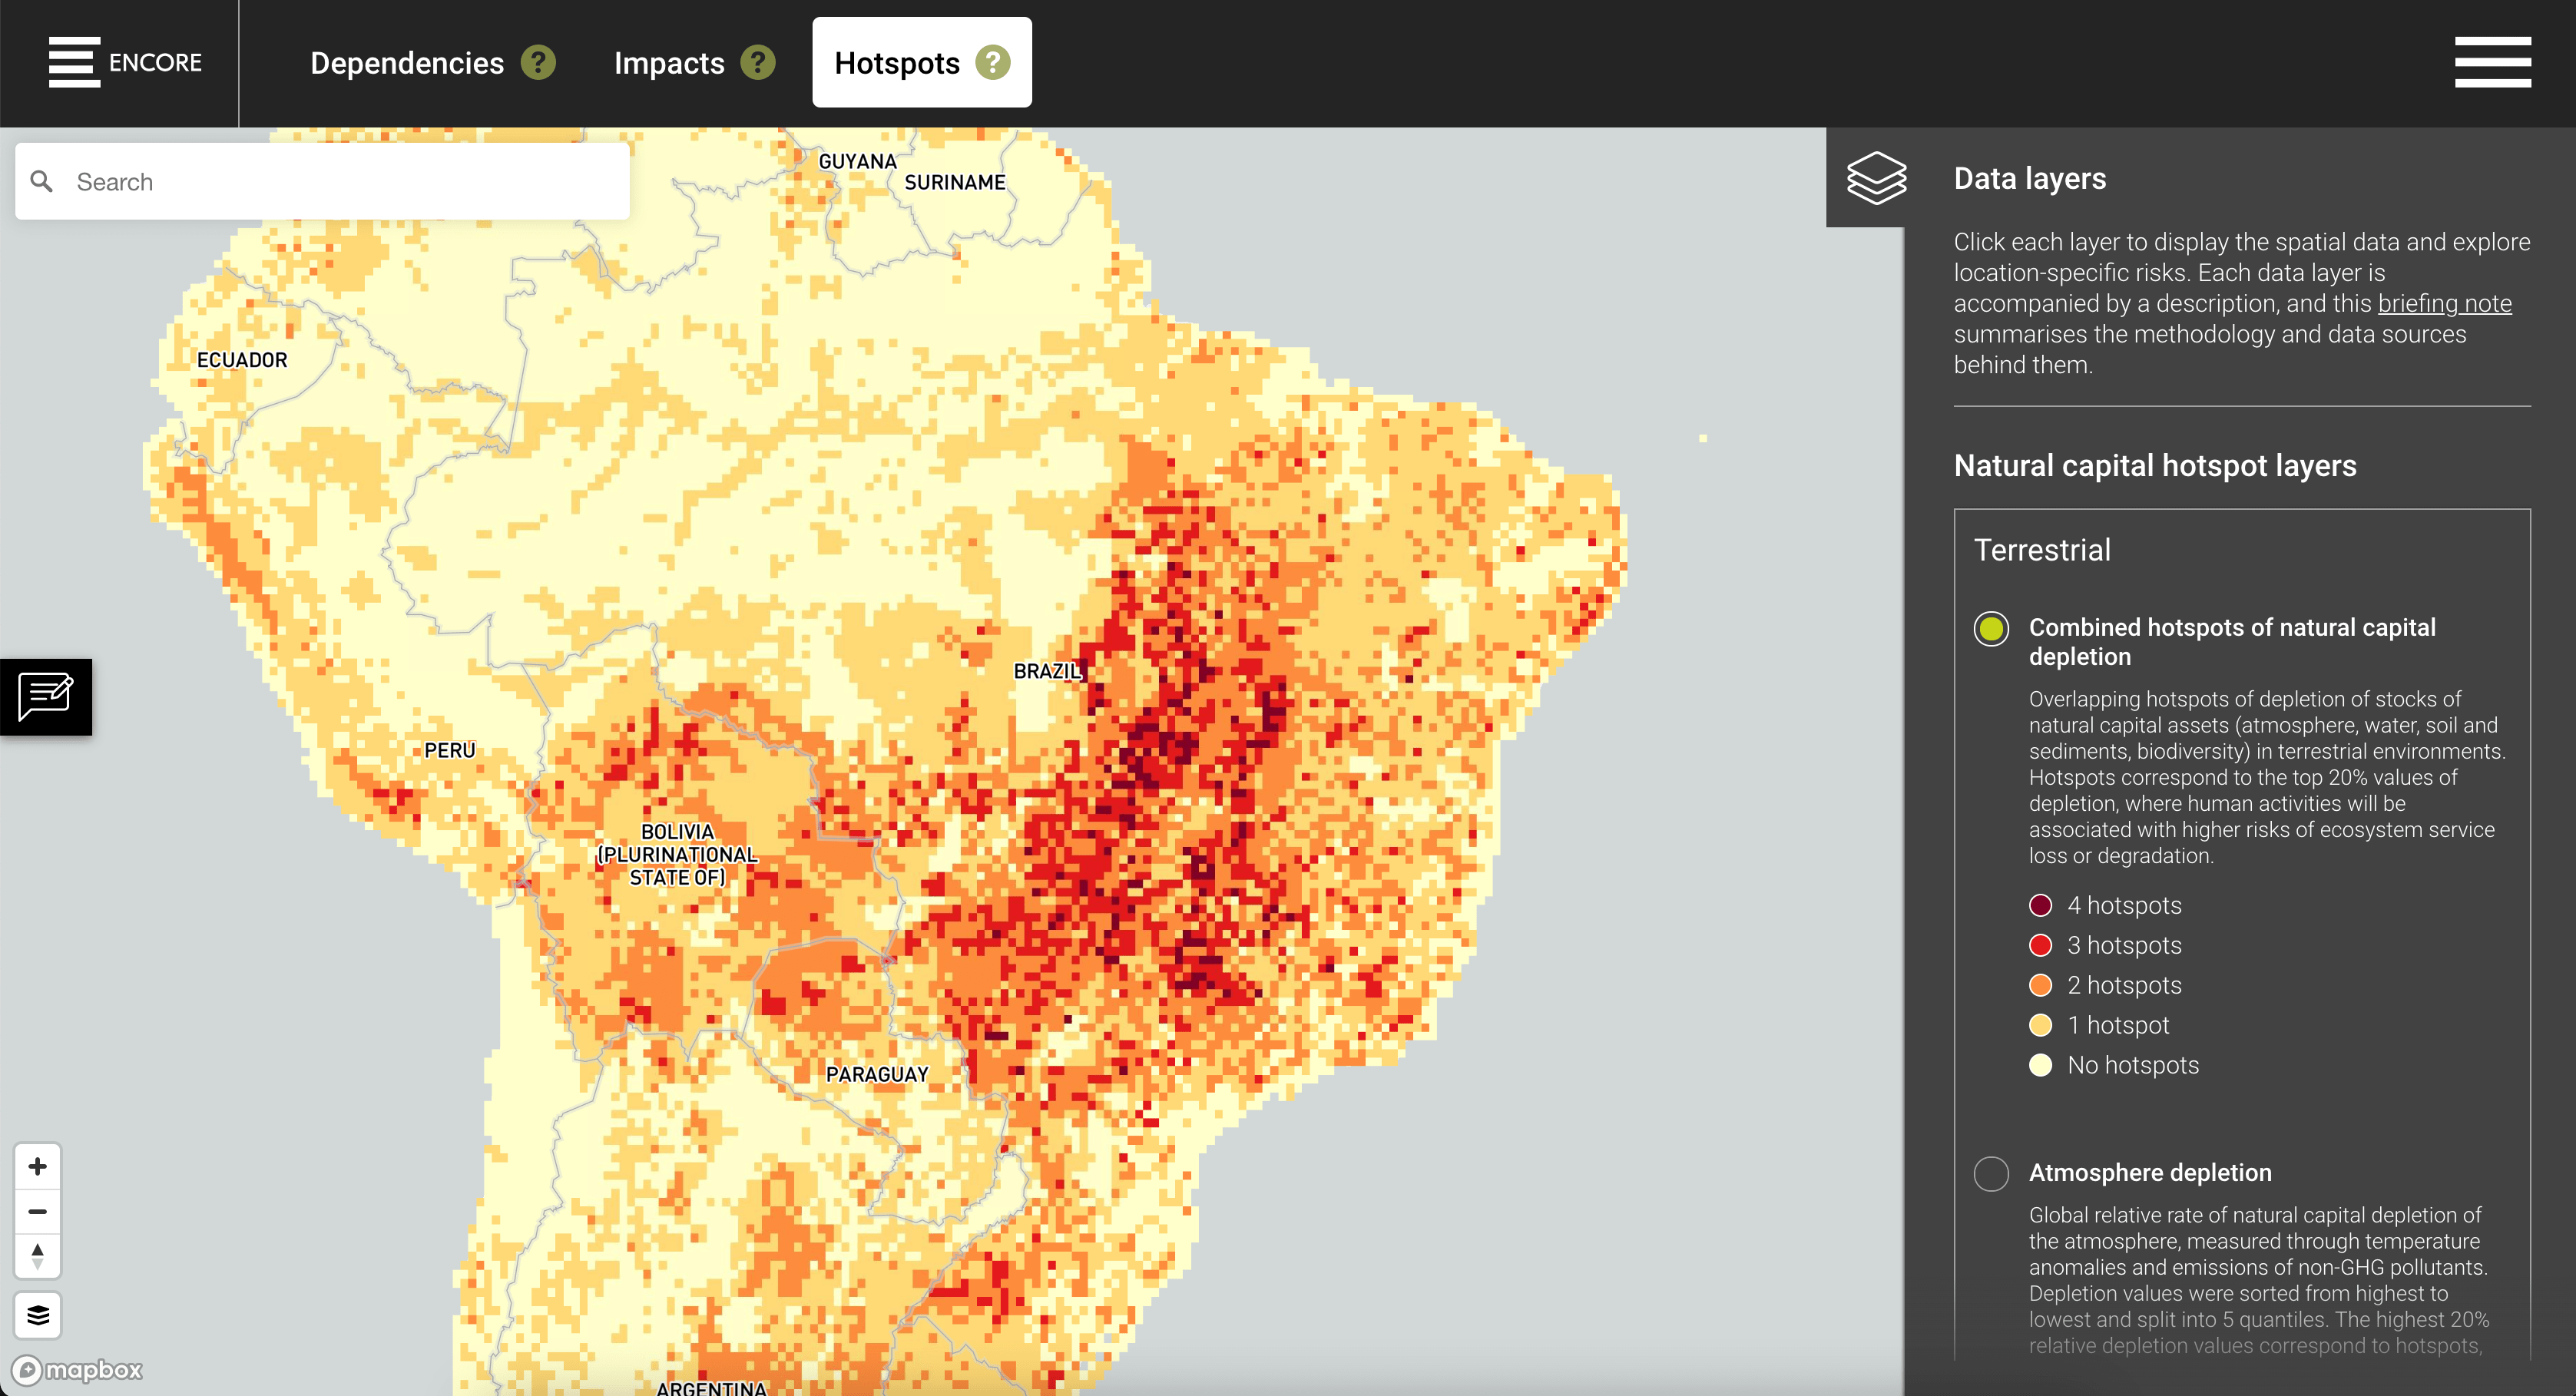 Explore hotspots of natural capital depletion using the map